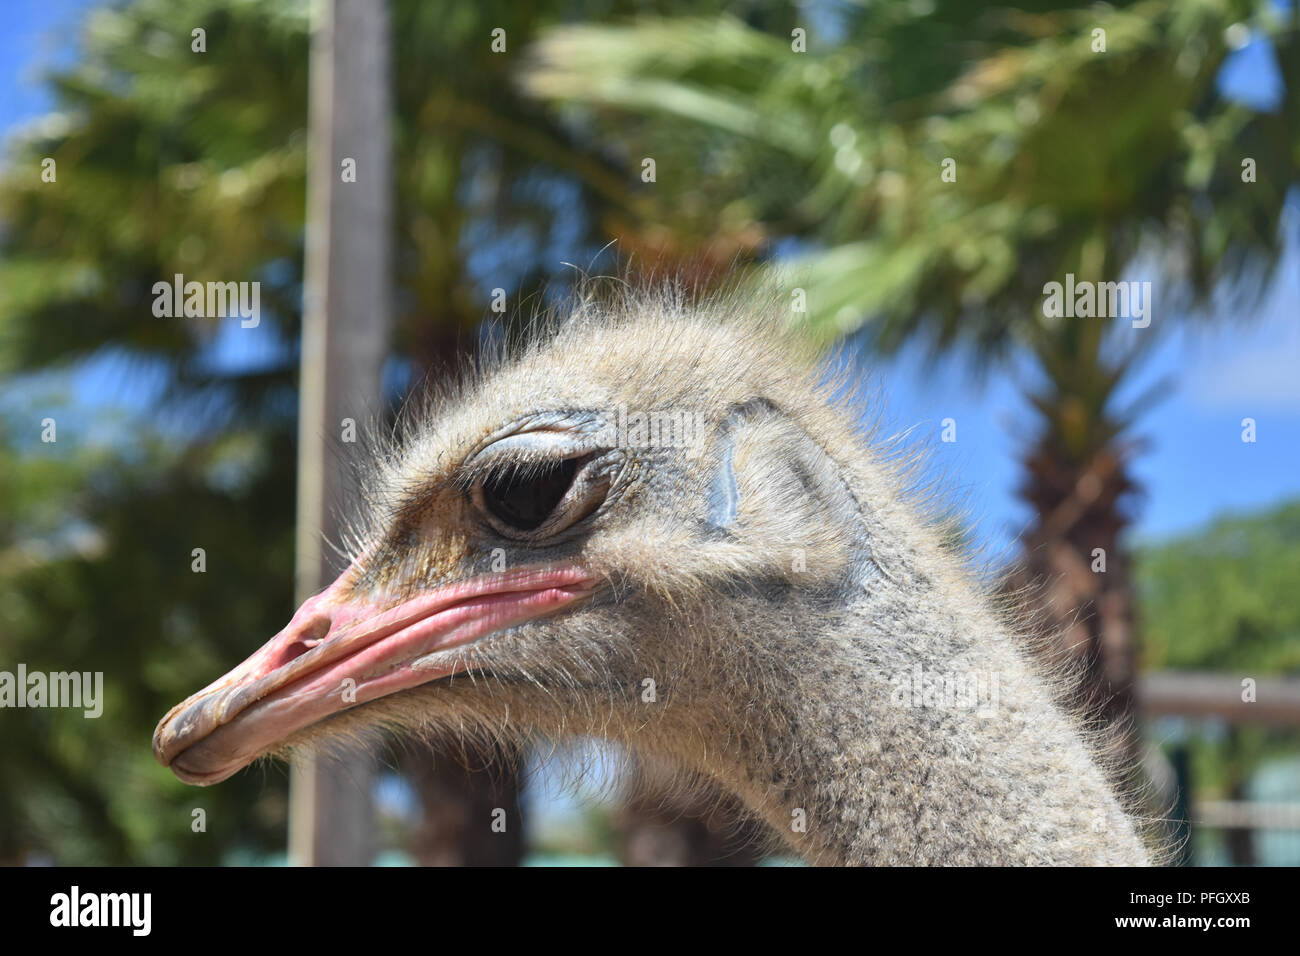 Ostrich with patchy feathers and a pink beak. Stock Photo